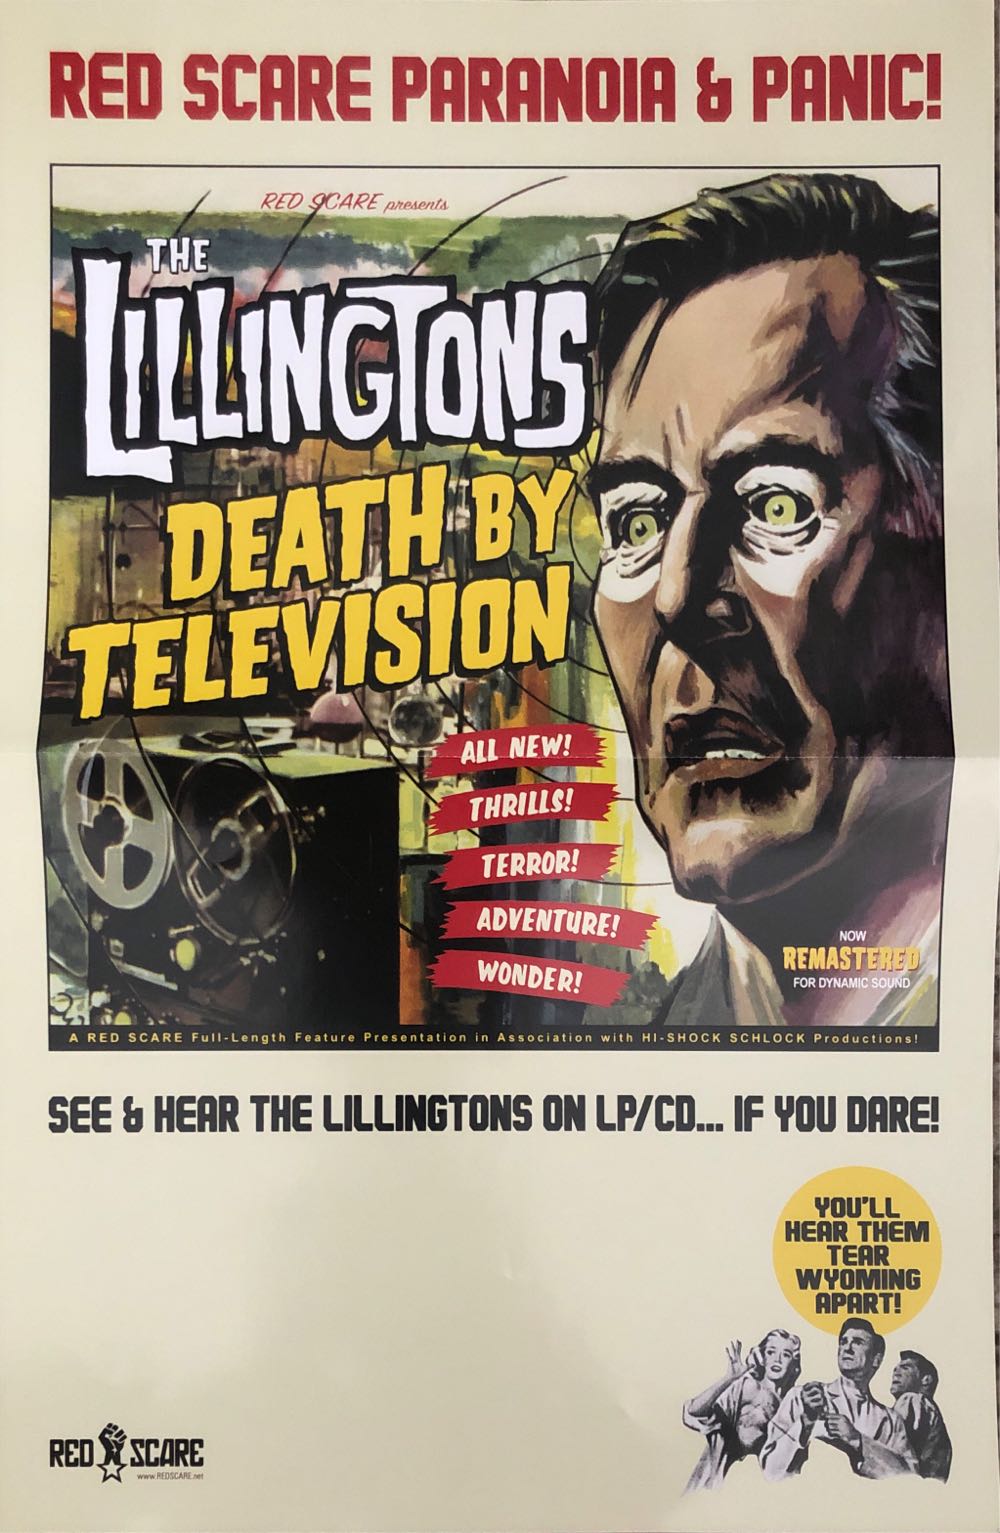 The Lillingtons - Death By Television Promo Poster - Red Scare Industries art collectible - Main Image 1